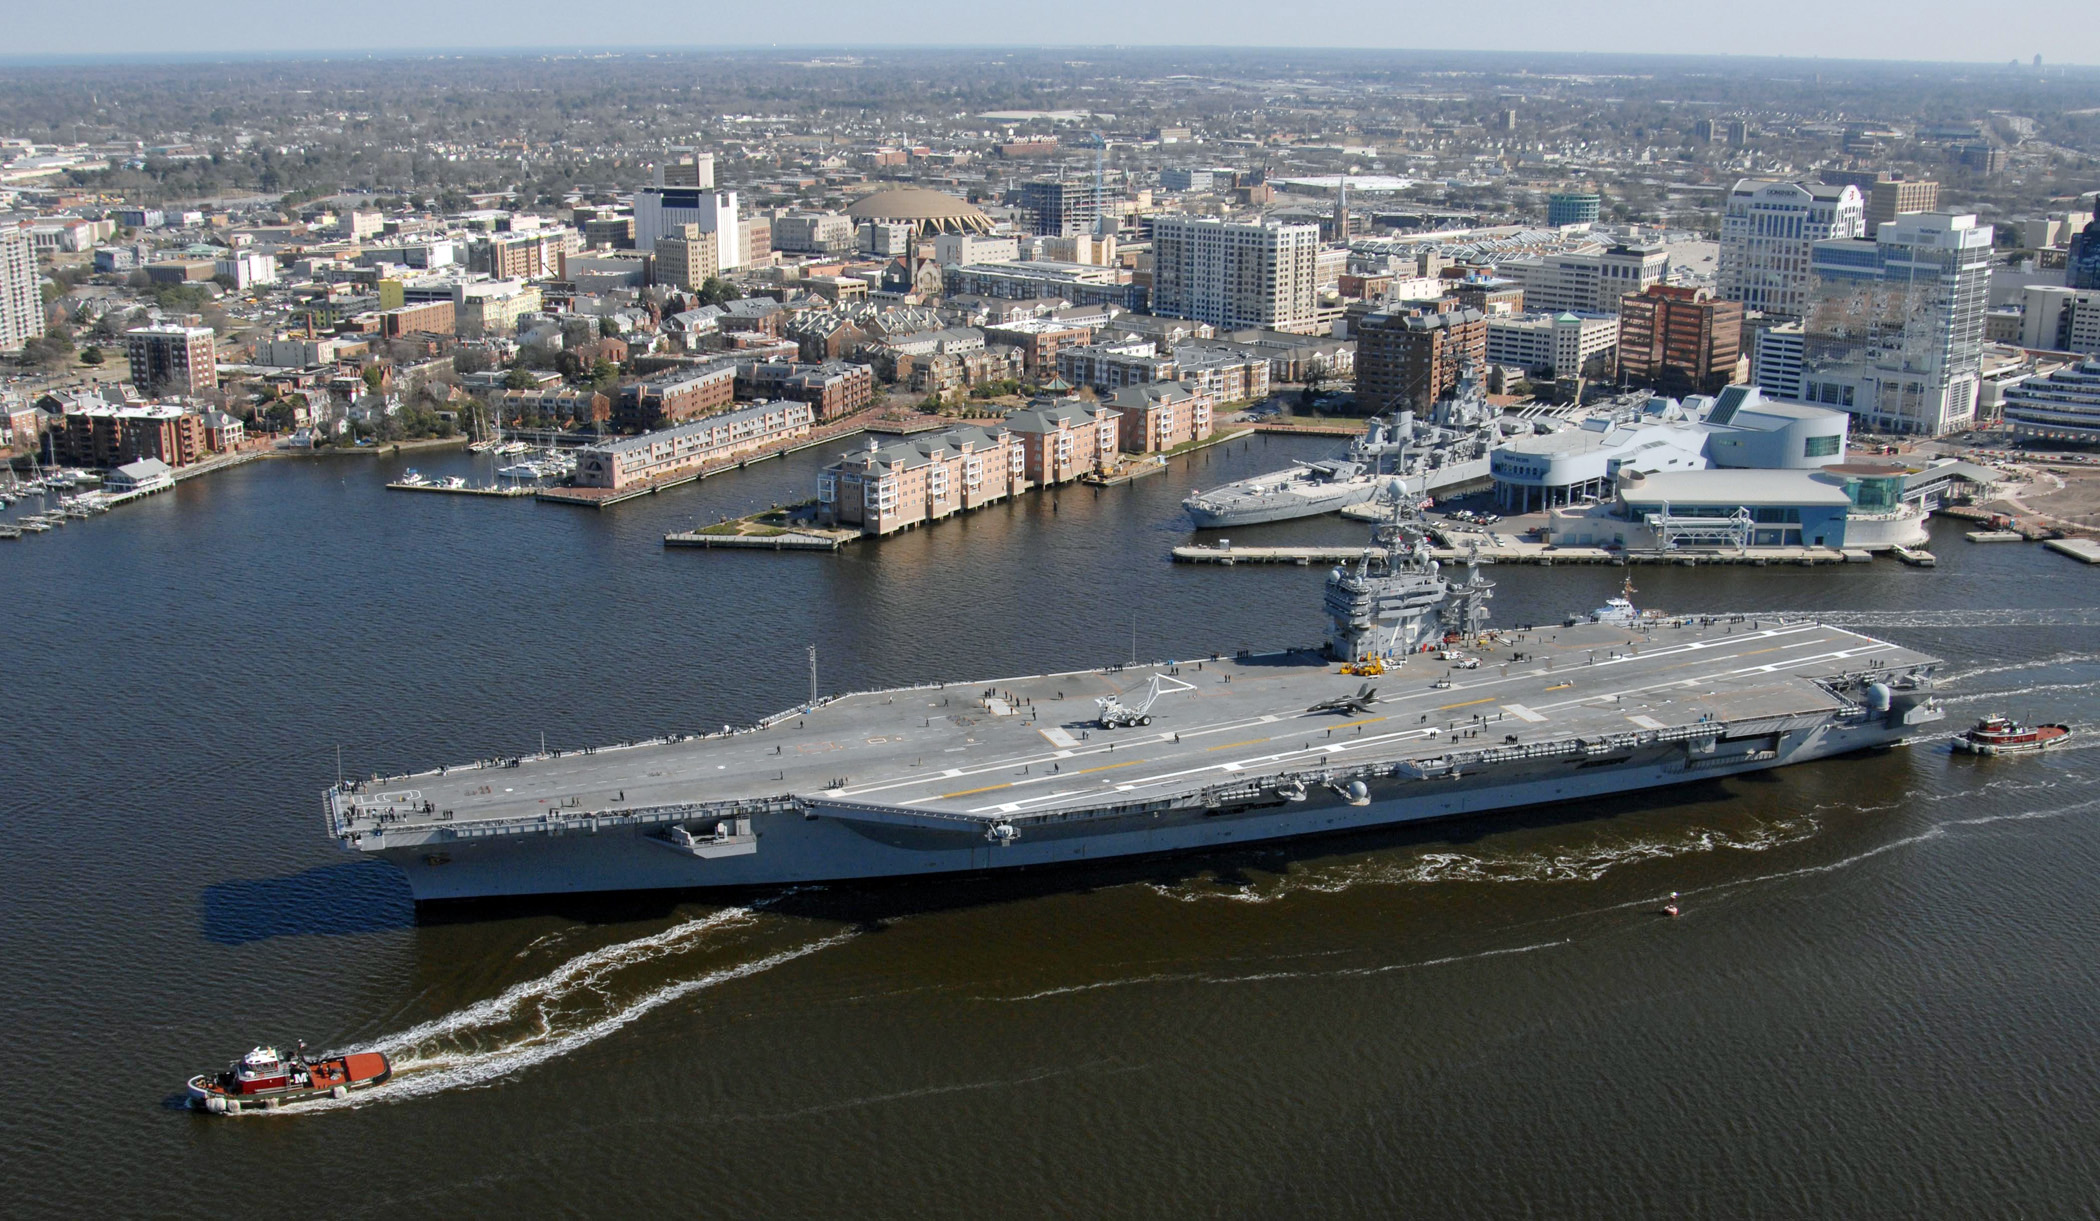 US Navy 090213-N-3673F-002 The Nimitz-class aircraft carrier USS Harry S. Truman (CVN 75) transits up the Elizabeth River as it passes the downtown Norfolk waterfront